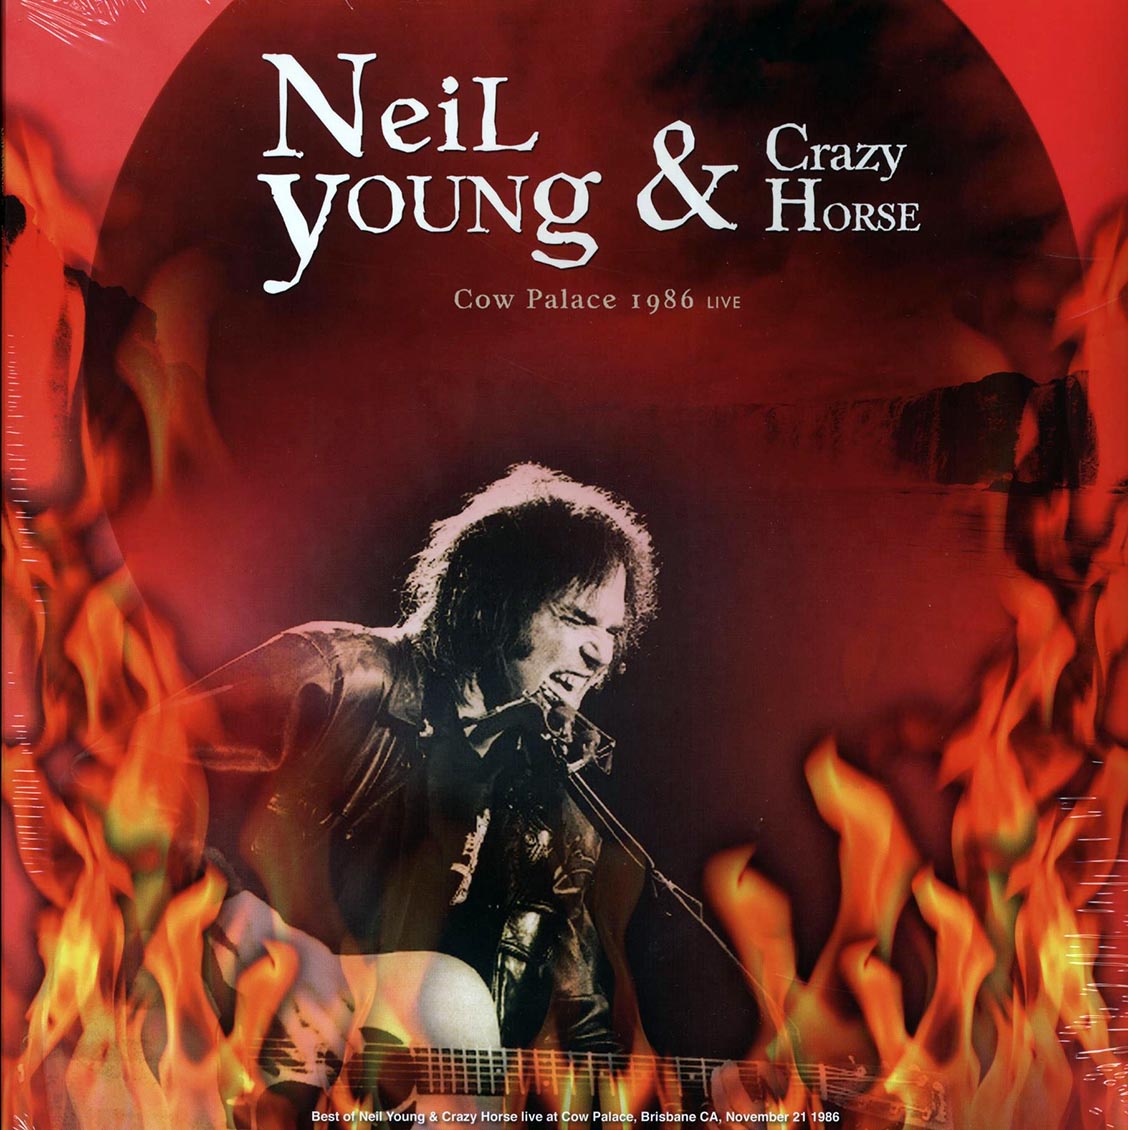 Neil Young & Crazy Horse - Cow Palace 1986 Live: Brisbane, CA, November 21st